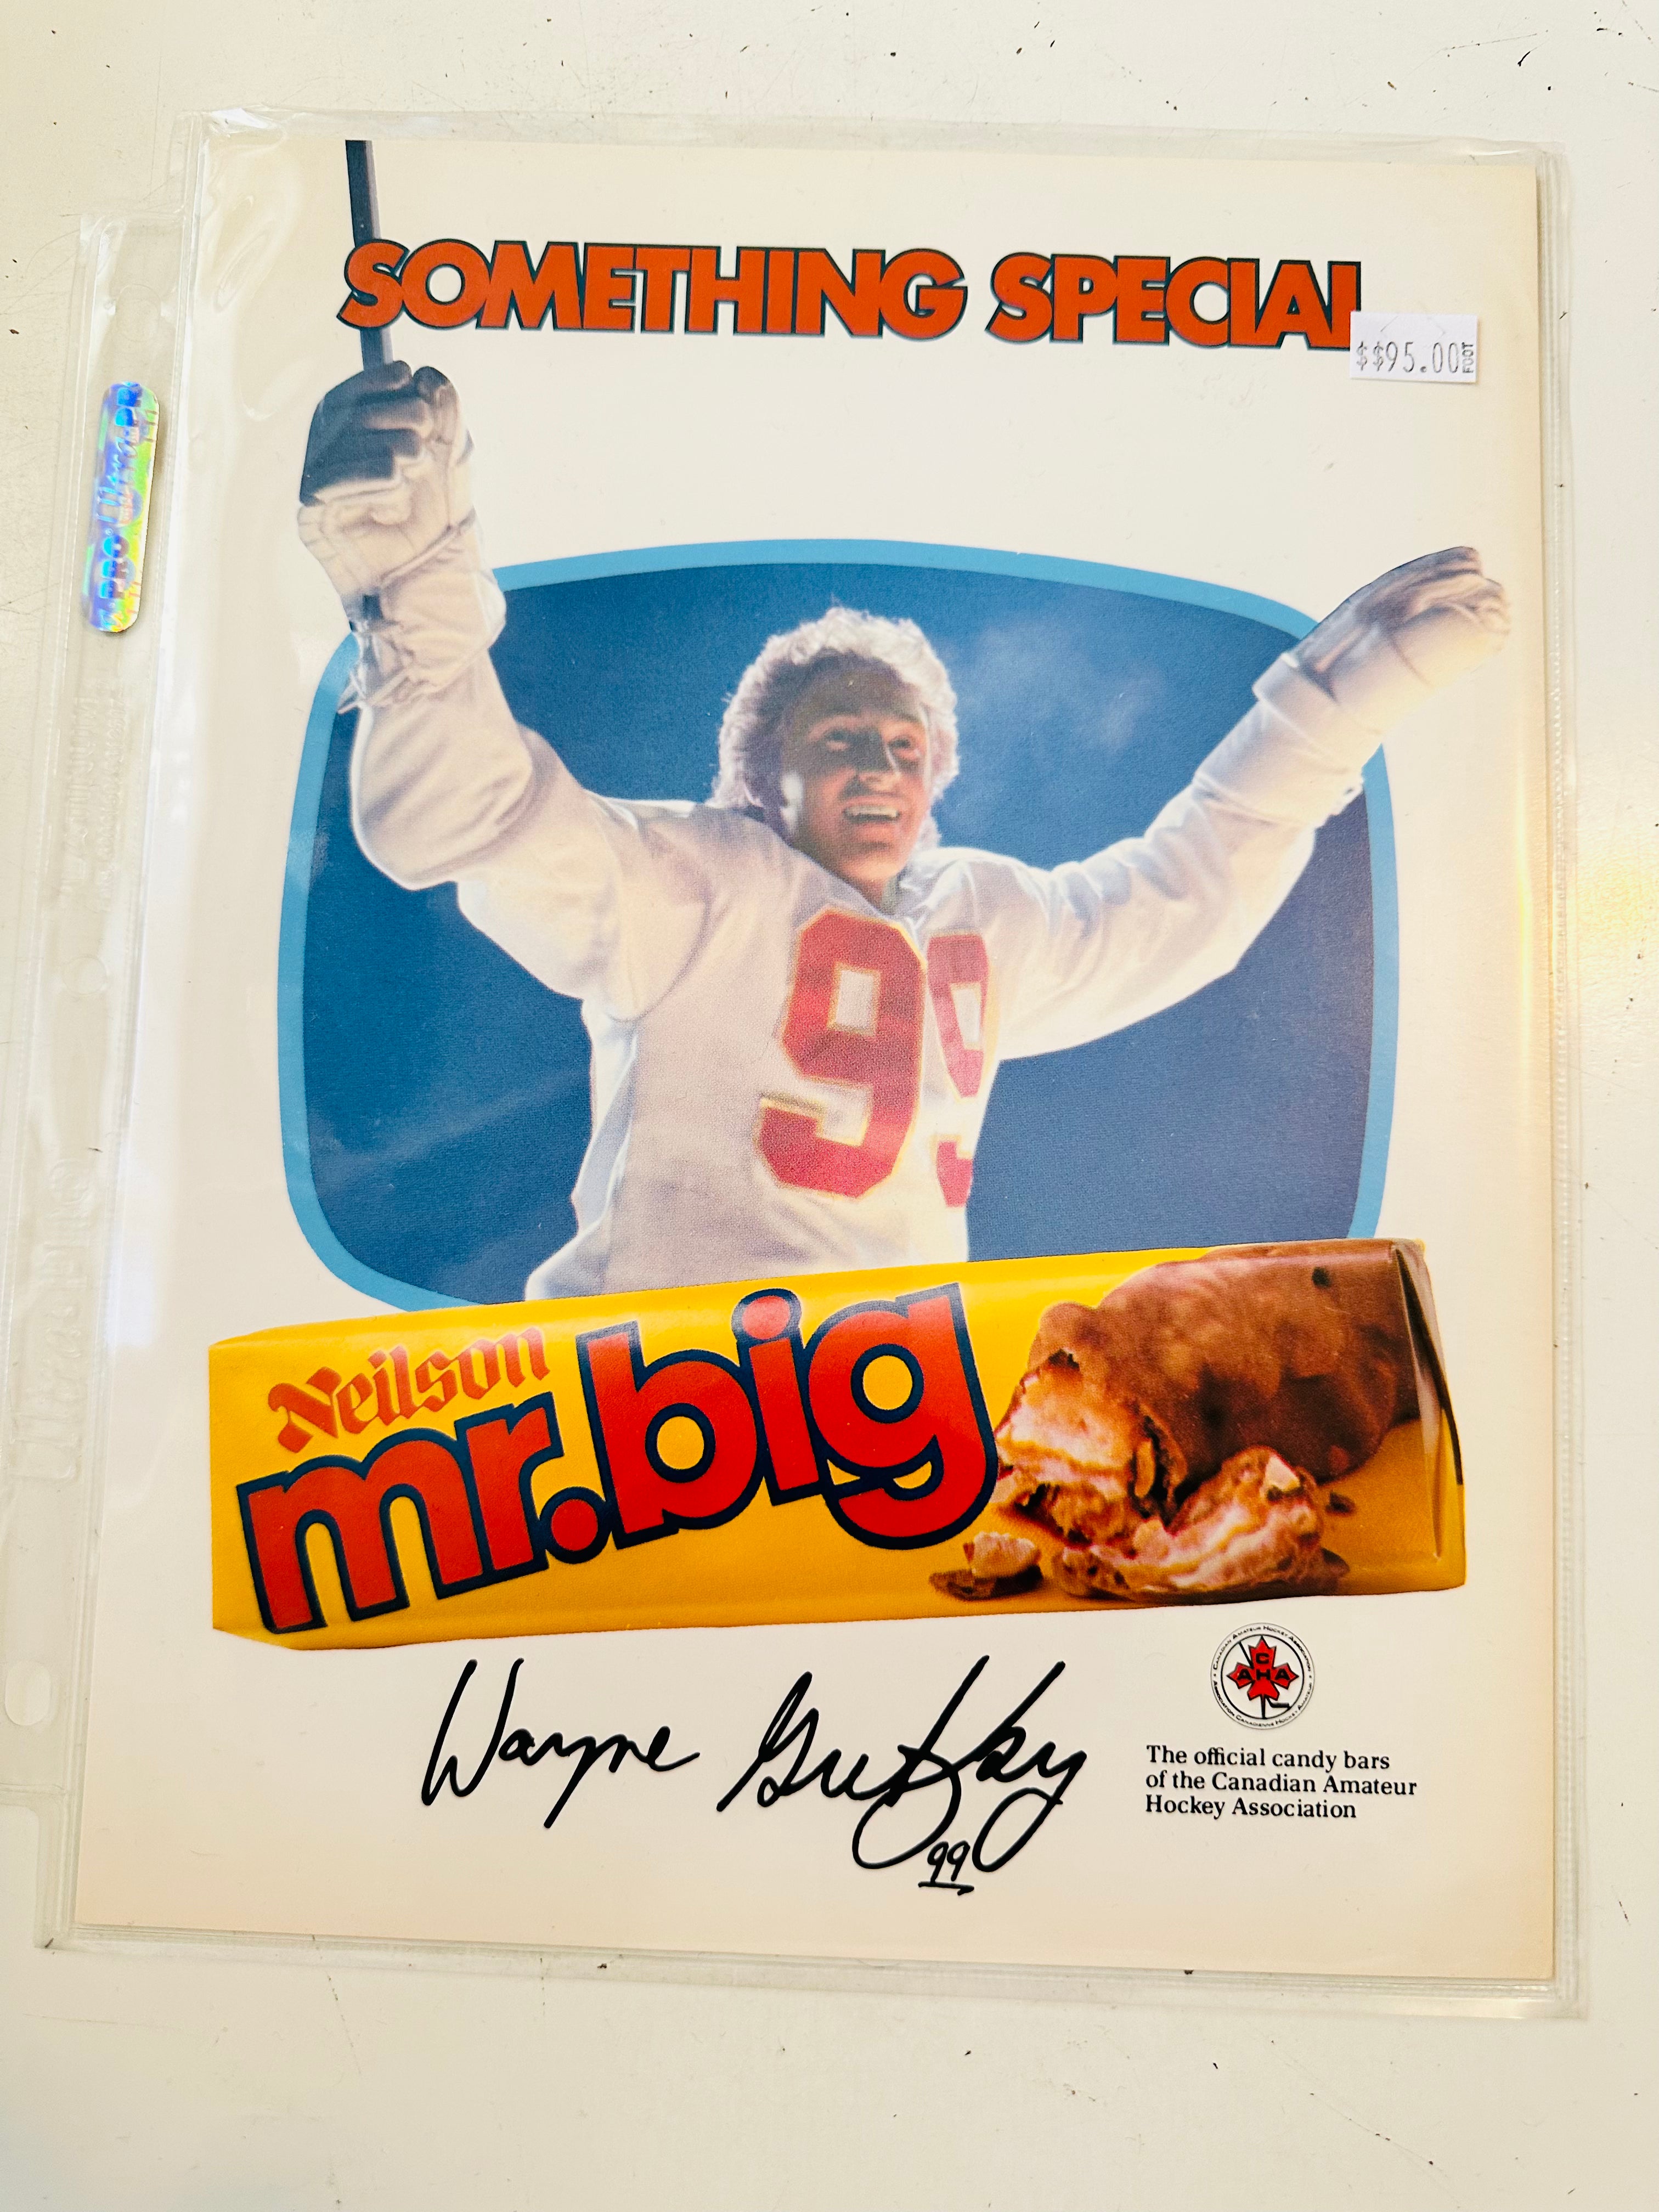 Wayne Gretzky Mr. Big rare press proof cardboard 8x10 size ad 1980s. Look at the second pic of Gretzky back in 1980s doing this promotion! Cool.